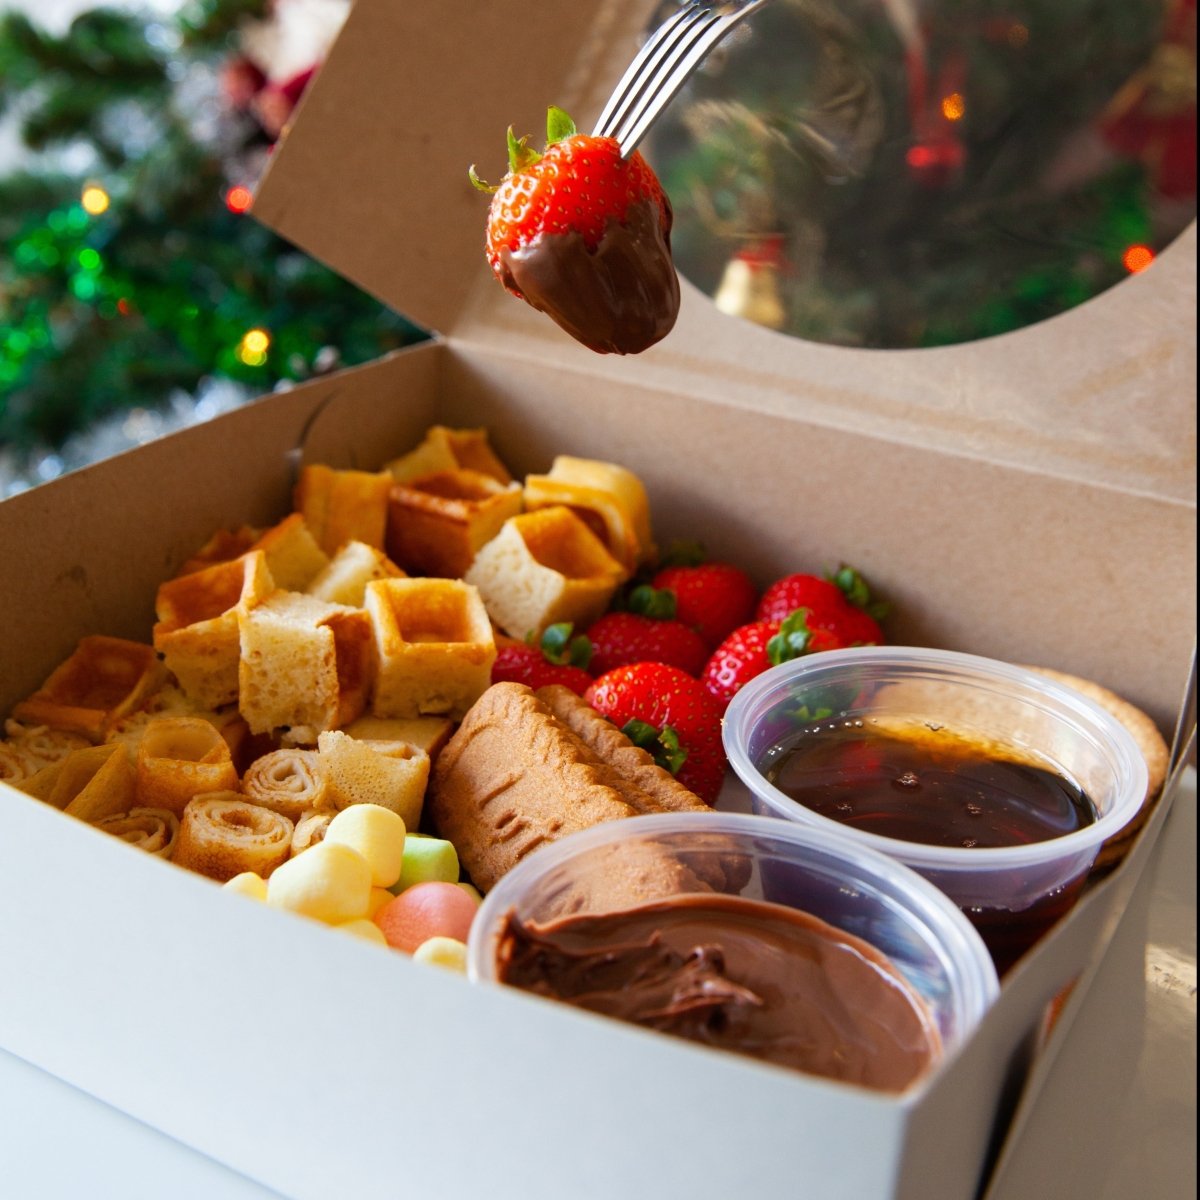 2 dips of your choice, including nutella, caramel, chocolate fudge, maple syrup, honey with the Joy Box